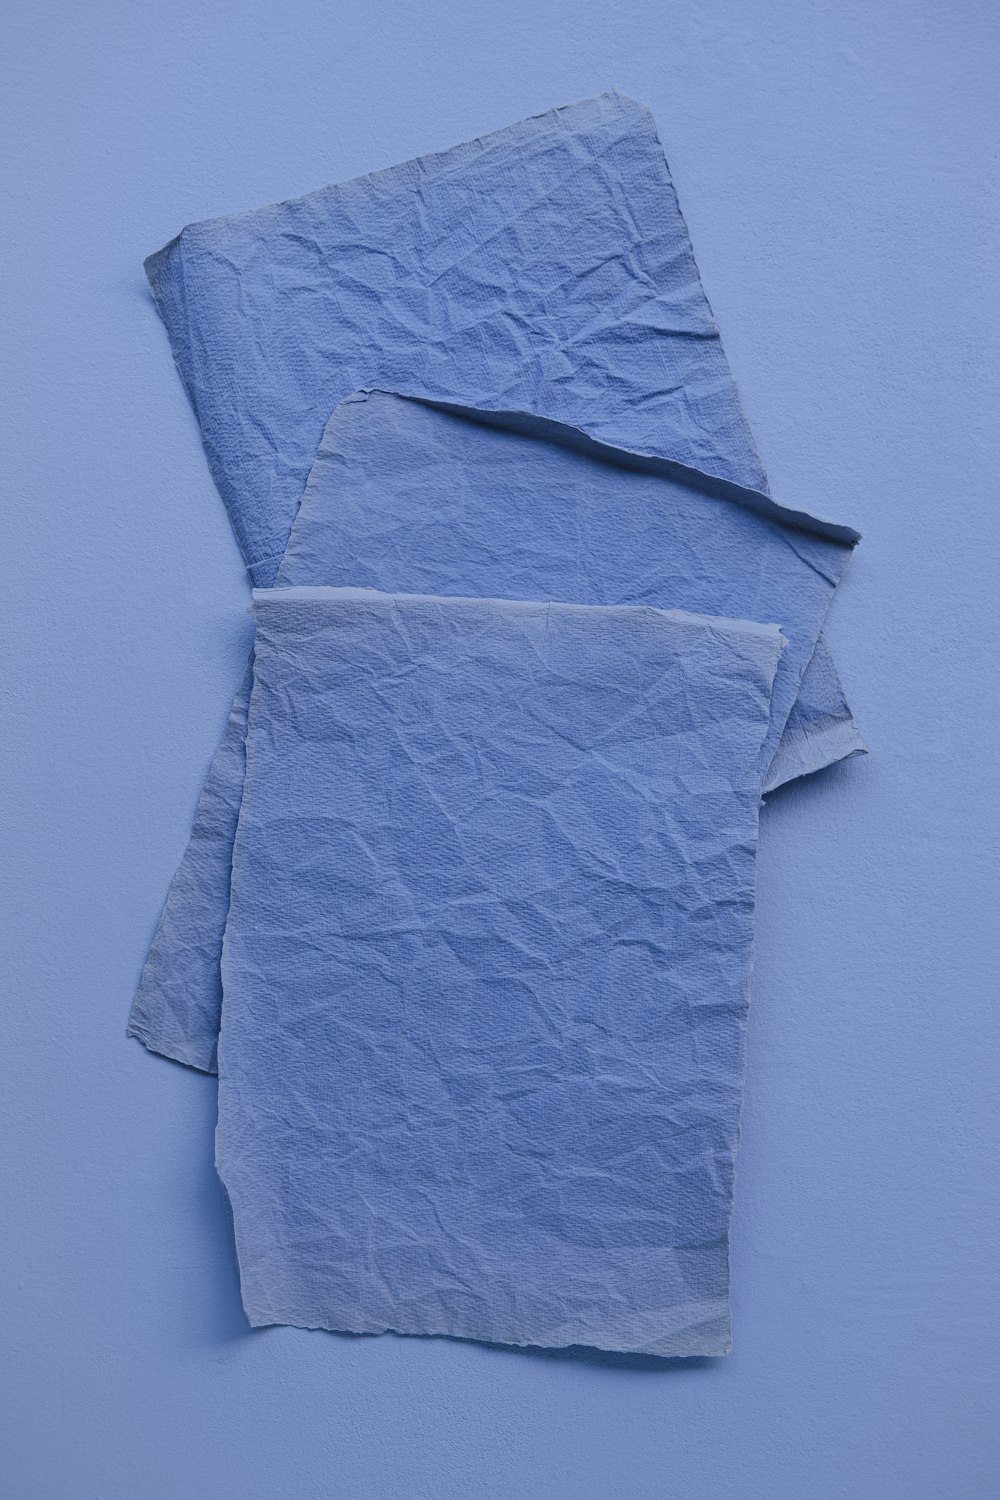 two pieces of blue paper on a blue surface